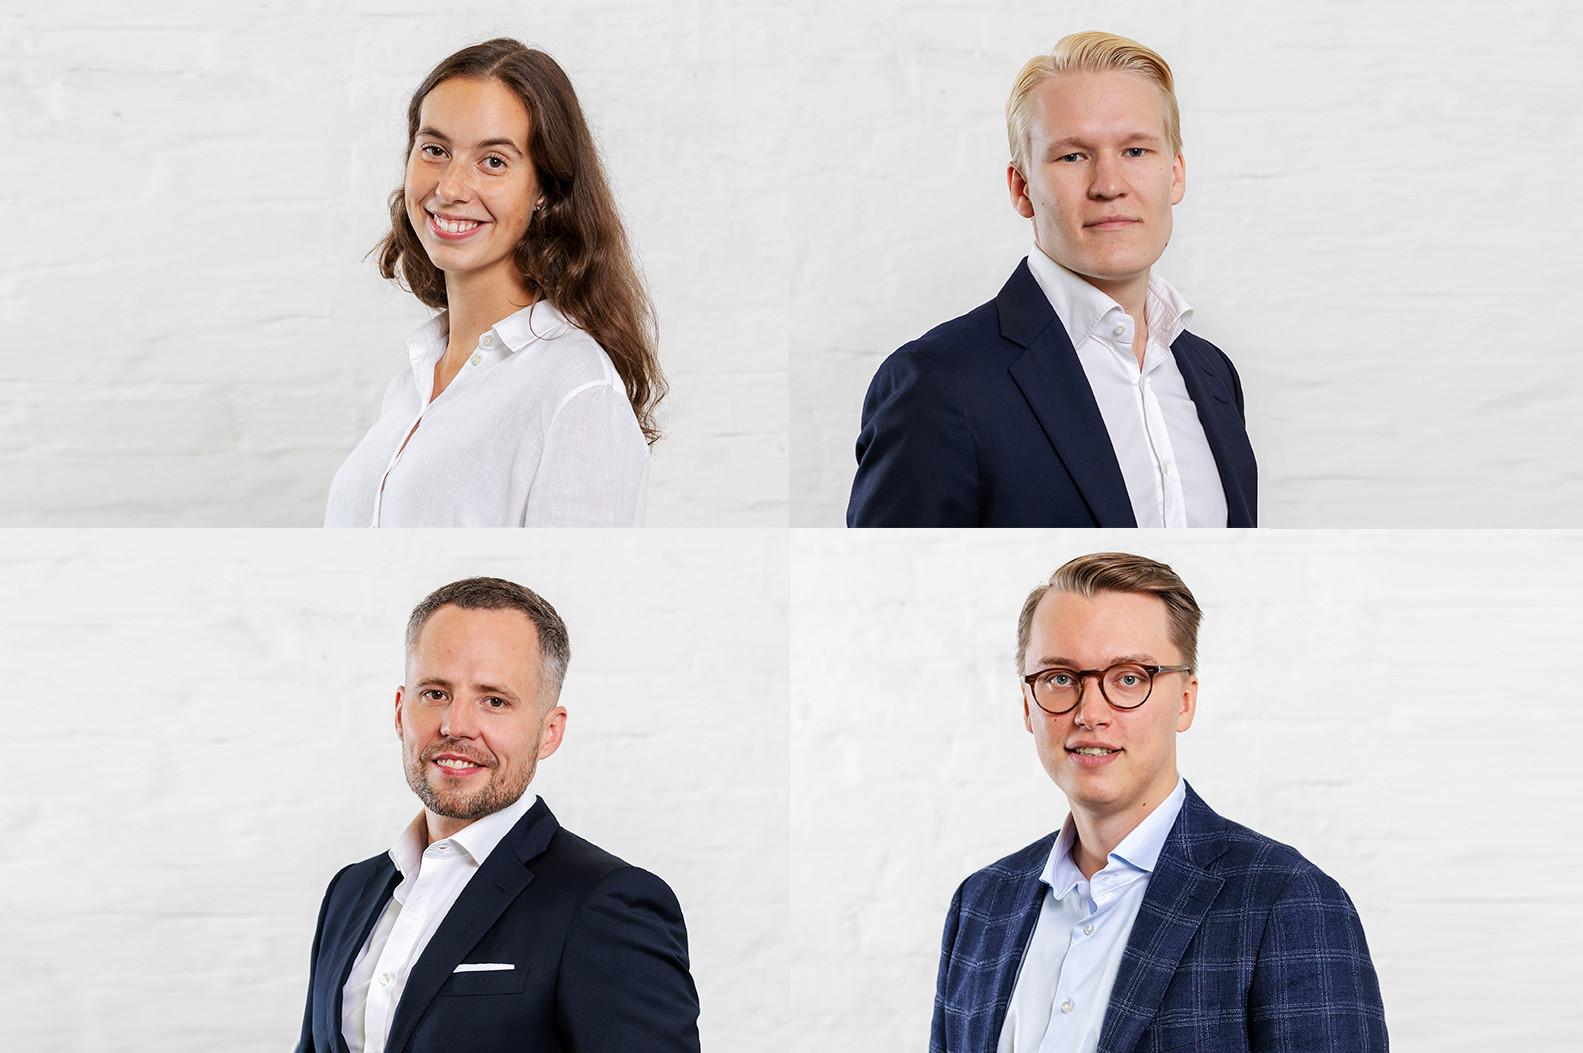 Four new professionals to enhance Newil&Bau’s competence